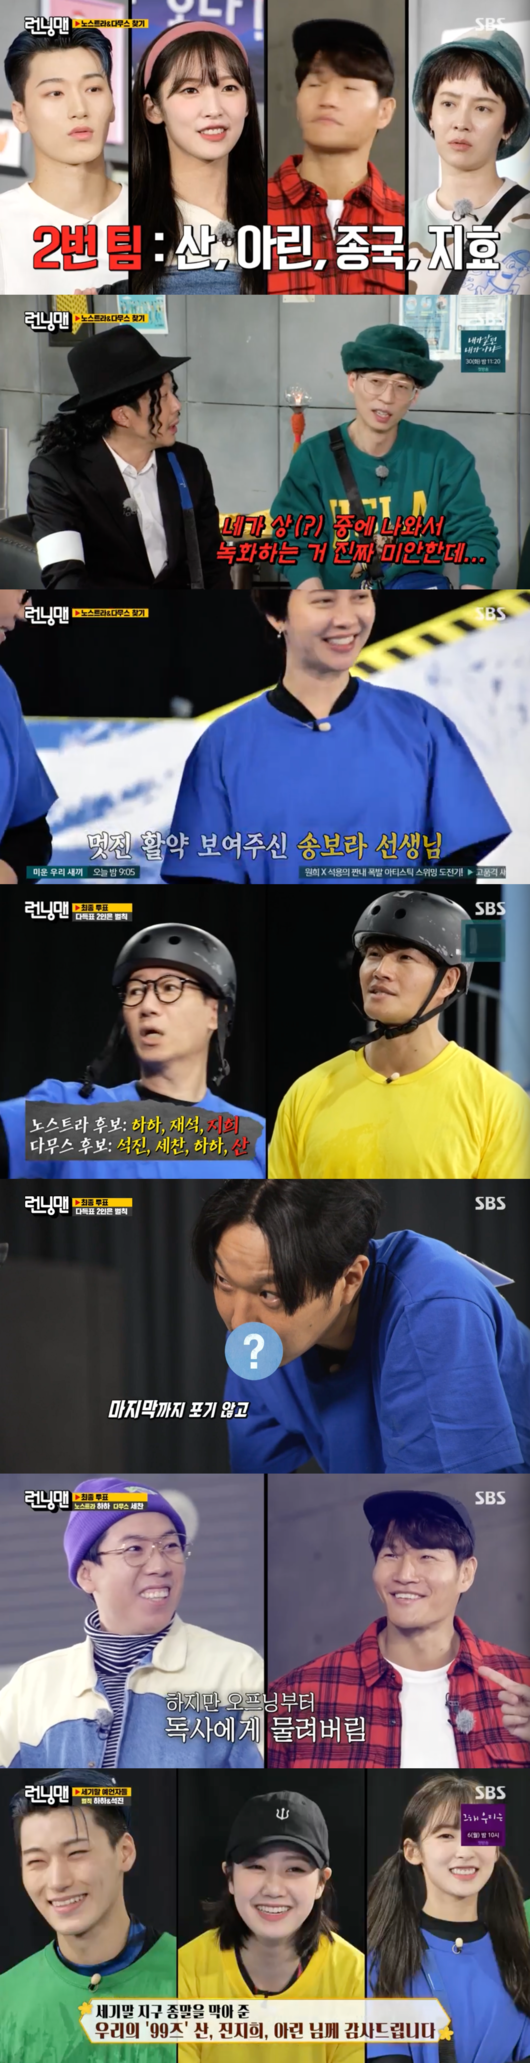 Running Man Haha and Yang Se-chan were Nostr and Damus.On SBS Running Man, which was broadcasted on the afternoon of the 28th, the members returned to the end of the century on December 31, 1999.Here, in 1999, Jin Ji-hee, Oh My Girl Arine, and Mount Eighties appeared as guests.The production team said, If you stay well today, you can welcome the millennium safely.However, there are two Nostra and Damus who interfere with the Millennium in this, he said. If Nostra and Damus are arrested in the final vote to build up the prize money through the mission, citizens will acquire individual prize money.If only one of them is arrested, citizens will get half of the cumulative prize money and if they fail to make the final arrest, only the prophet will take the prize money. The first mission was a shot.Yang Se-chan, Ji Suk-jin and Jeon So-min bought the white team, Arryn, Kim Jong-kook and Song Ji-hyo won the black team, Jin Ji-hee, Yoo Jae-Suk and Haha won the RED team.After a fierce battle, Kim Jong-kook and the Black Team won the game.The first black team won 230,000 won, the second white team won 140,000 won, and the third RED team won 70,000 won.But before the first mission, Nostra and Damus had predicted the rankings of the three teams, and the crew had ranked Nost and Damus had told them that he was wrong.Haha, Yoo Jae-Suk and Jin Ji-hee, who came in the top spot for this reason, were mentioned as nostra candidates.Kim Jong-kook drove Yang Se-chan and Ji Suk-jin to be like Damus with a sharp tip.The second mission is the Balloon World Cup.Ji Suk-jin and Song Ji-hyo struggled with their hands tight but lost to the Konyaspor team of Jeon So-min - Mountain, Jeon So-min - Yang Se-chan.The last mission was the Millennium East and East Club; a game that wins when you put a name tag on top.Yang Se-chan of Konyaspor team - Kim Jong-kook of mountain and yellow team - Jin Ji-hee, Arin of blue team - Song Ji-hyo came out.However, the slippery soapy slope caused only the members body gags.Eventually, the crew allowed the side line to catch, and Kim Jong-kook was the first to take the top.The members, minus Yang Se-chan, climbed to the middle, but they could hardly advance because they were fighting each other.Yang Se-chan didnt make it to the end and ended with Kim Jong-kooks victory; the blue team came in second, and the Konyaspor team took bottom.The second round also saw the yellow team win.As a result of the final mission, the yellow team won 150,000 won, the Konyaspor team won 100,000 won, and the blue team won 50,000 won.All that remains is the arrest of Nostra and Damus; Kim Jong-kook cast two Haha votes, three Yang Se-chan votes, and Jin Ji-hee cast one Haha and one Yang Se-chan.Haha, who was being driven to Nostra, carefully voted.Ji Suk-jin, who received 13 votes as a result of the vote, and Haha, who received 9 votes, were on the bench; Northline Haha hit Kim Jong-kook when he was arrested.But Ji Suk-jin was not Damus; it turned out Yang Se-chan had naive guests pinned and drove him to Ji Suk-jin.For this reason Haha and Ji Suk-jin were penalised for riding a soapy water slide.On the other hand, Song Ji-hyo did a short cut on the day and received the attention of the members.Jeon So-min mentioned Yoon Eun-hyes character in the drama Coffee Princes No. 1 store, saying, At last, Ji Hyos sister decided to buy her brothers heart.Song Ji-hyo then burst into laughter at Jeon So-min, saying, What the fuck is that? Shut up.running man